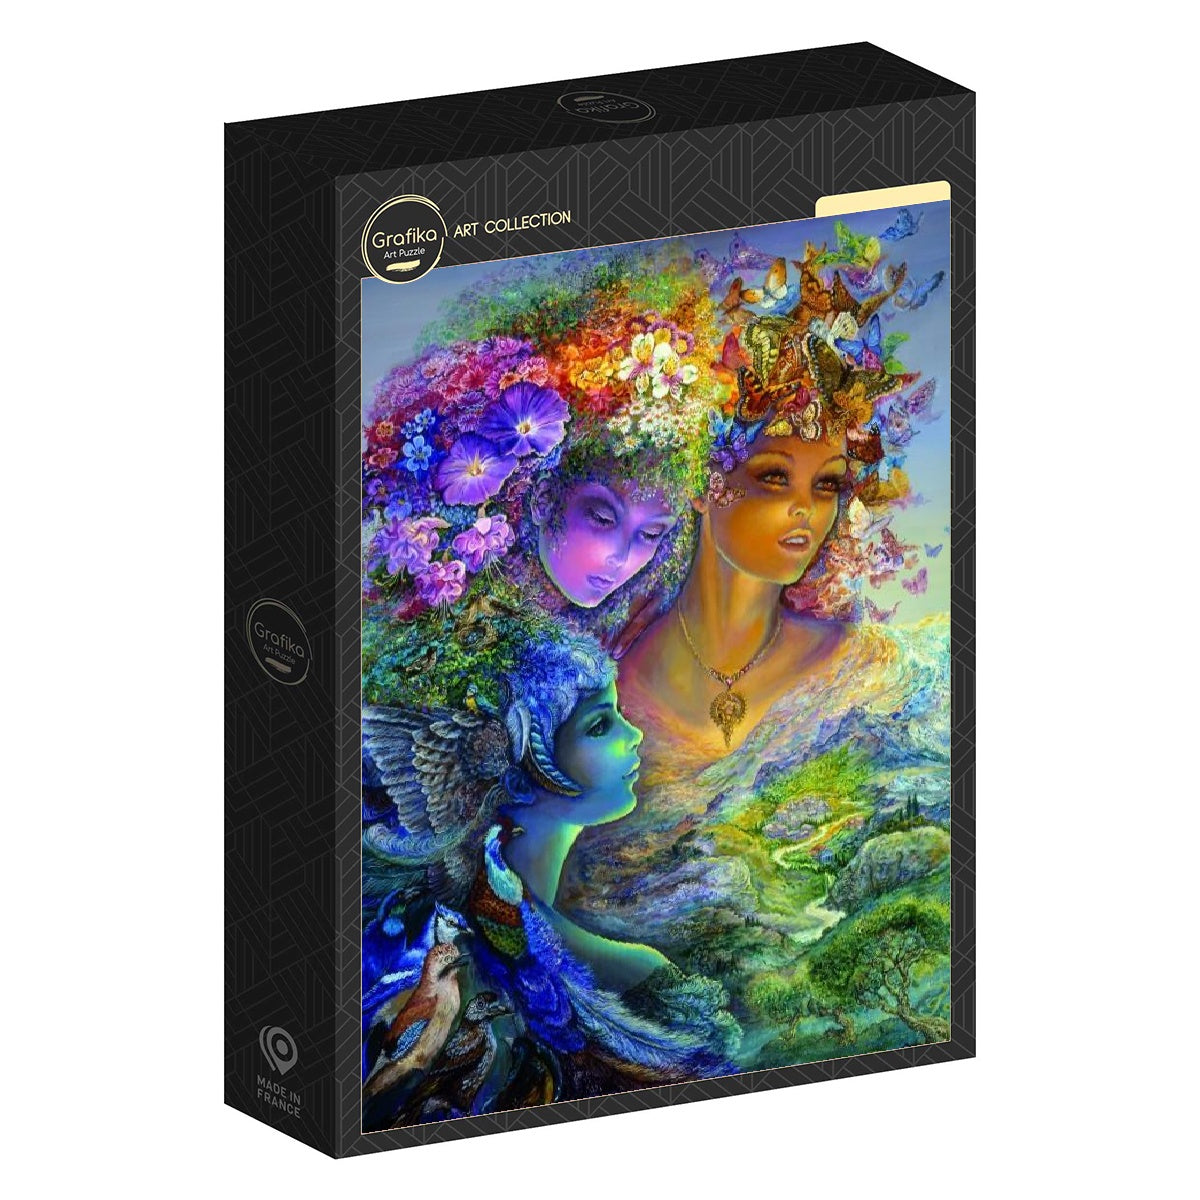 The Three Graces by Josephine Wall, 500 Piece Puzzle